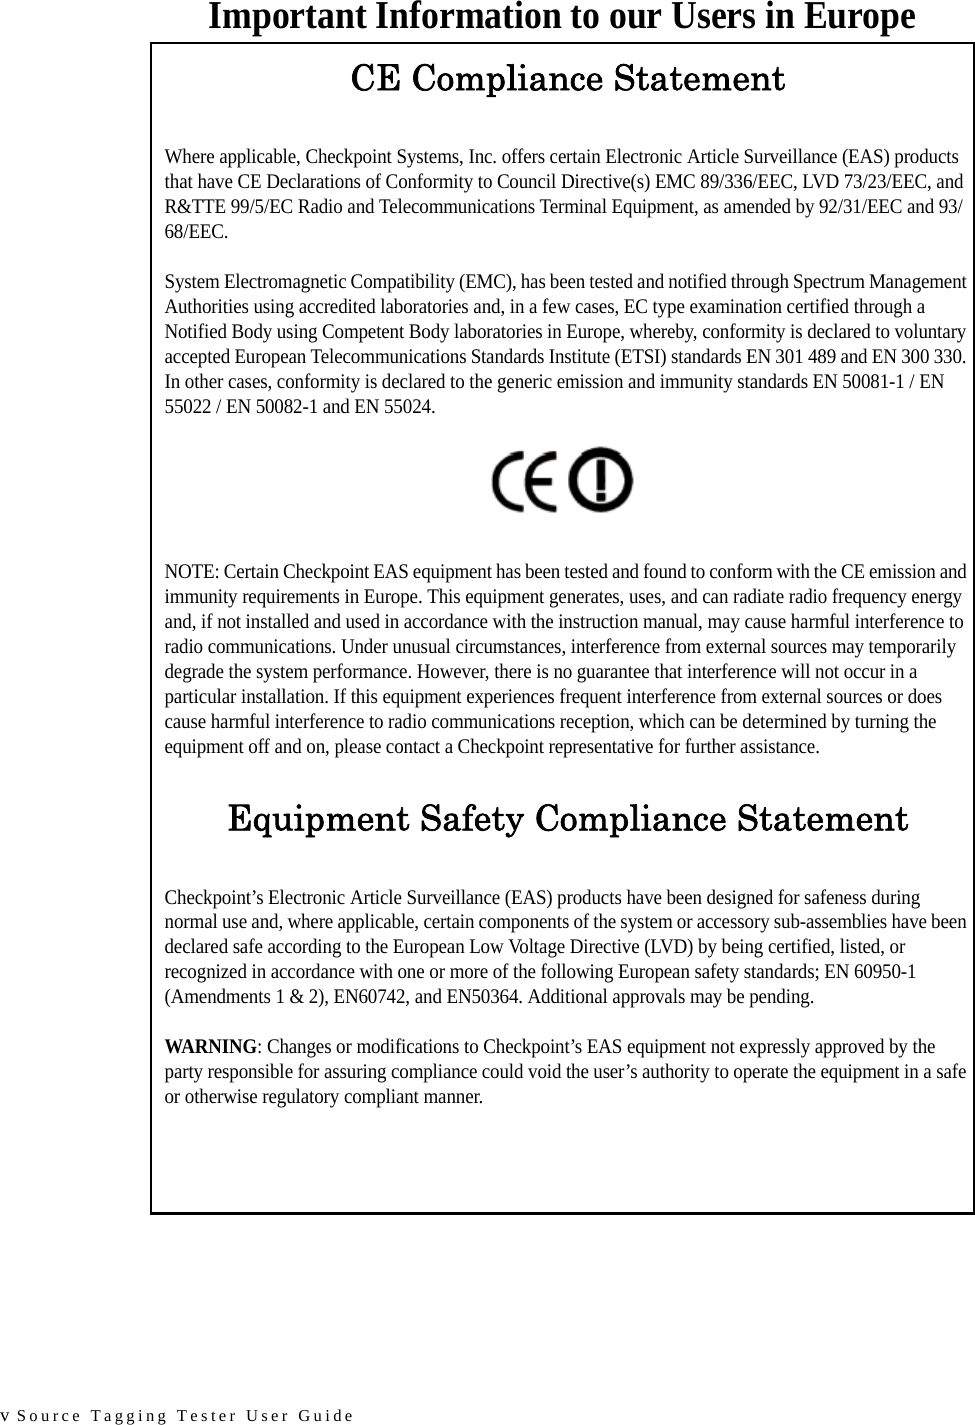 v Source Tagging Tester User GuideImportant Information to our Users in EuropeCE Compliance StatementWhere applicable, Checkpoint Systems, Inc. offers certain Electronic Article Surveillance (EAS) products that have CE Declarations of Conformity to Council Directive(s) EMC 89/336/EEC, LVD 73/23/EEC, and R&amp;TTE 99/5/EC Radio and Telecommunications Terminal Equipment, as amended by 92/31/EEC and 93/68/EEC.System Electromagnetic Compatibility (EMC), has been tested and notified through Spectrum Management Authorities using accredited laboratories and, in a few cases, EC type examination certified through a Notified Body using Competent Body laboratories in Europe, whereby, conformity is declared to voluntary accepted European Telecommunications Standards Institute (ETSI) standards EN 301 489 and EN 300 330. In other cases, conformity is declared to the generic emission and immunity standards EN 50081-1 / EN 55022 / EN 50082-1 and EN 55024.NOTE: Certain Checkpoint EAS equipment has been tested and found to conform with the CE emission and immunity requirements in Europe. This equipment generates, uses, and can radiate radio frequency energy and, if not installed and used in accordance with the instruction manual, may cause harmful interference to radio communications. Under unusual circumstances, interference from external sources may temporarily degrade the system performance. However, there is no guarantee that interference will not occur in a particular installation. If this equipment experiences frequent interference from external sources or does cause harmful interference to radio communications reception, which can be determined by turning the equipment off and on, please contact a Checkpoint representative for further assistance.Equipment Safety Compliance StatementCheckpoint’s Electronic Article Surveillance (EAS) products have been designed for safeness during normal use and, where applicable, certain components of the system or accessory sub-assemblies have been declared safe according to the European Low Voltage Directive (LVD) by being certified, listed, or recognized in accordance with one or more of the following European safety standards; EN 60950-1 (Amendments 1 &amp; 2), EN60742, and EN50364. Additional approvals may be pending.WARNING: Changes or modifications to Checkpoint’s EAS equipment not expressly approved by the party responsible for assuring compliance could void the user’s authority to operate the equipment in a safe or otherwise regulatory compliant manner.